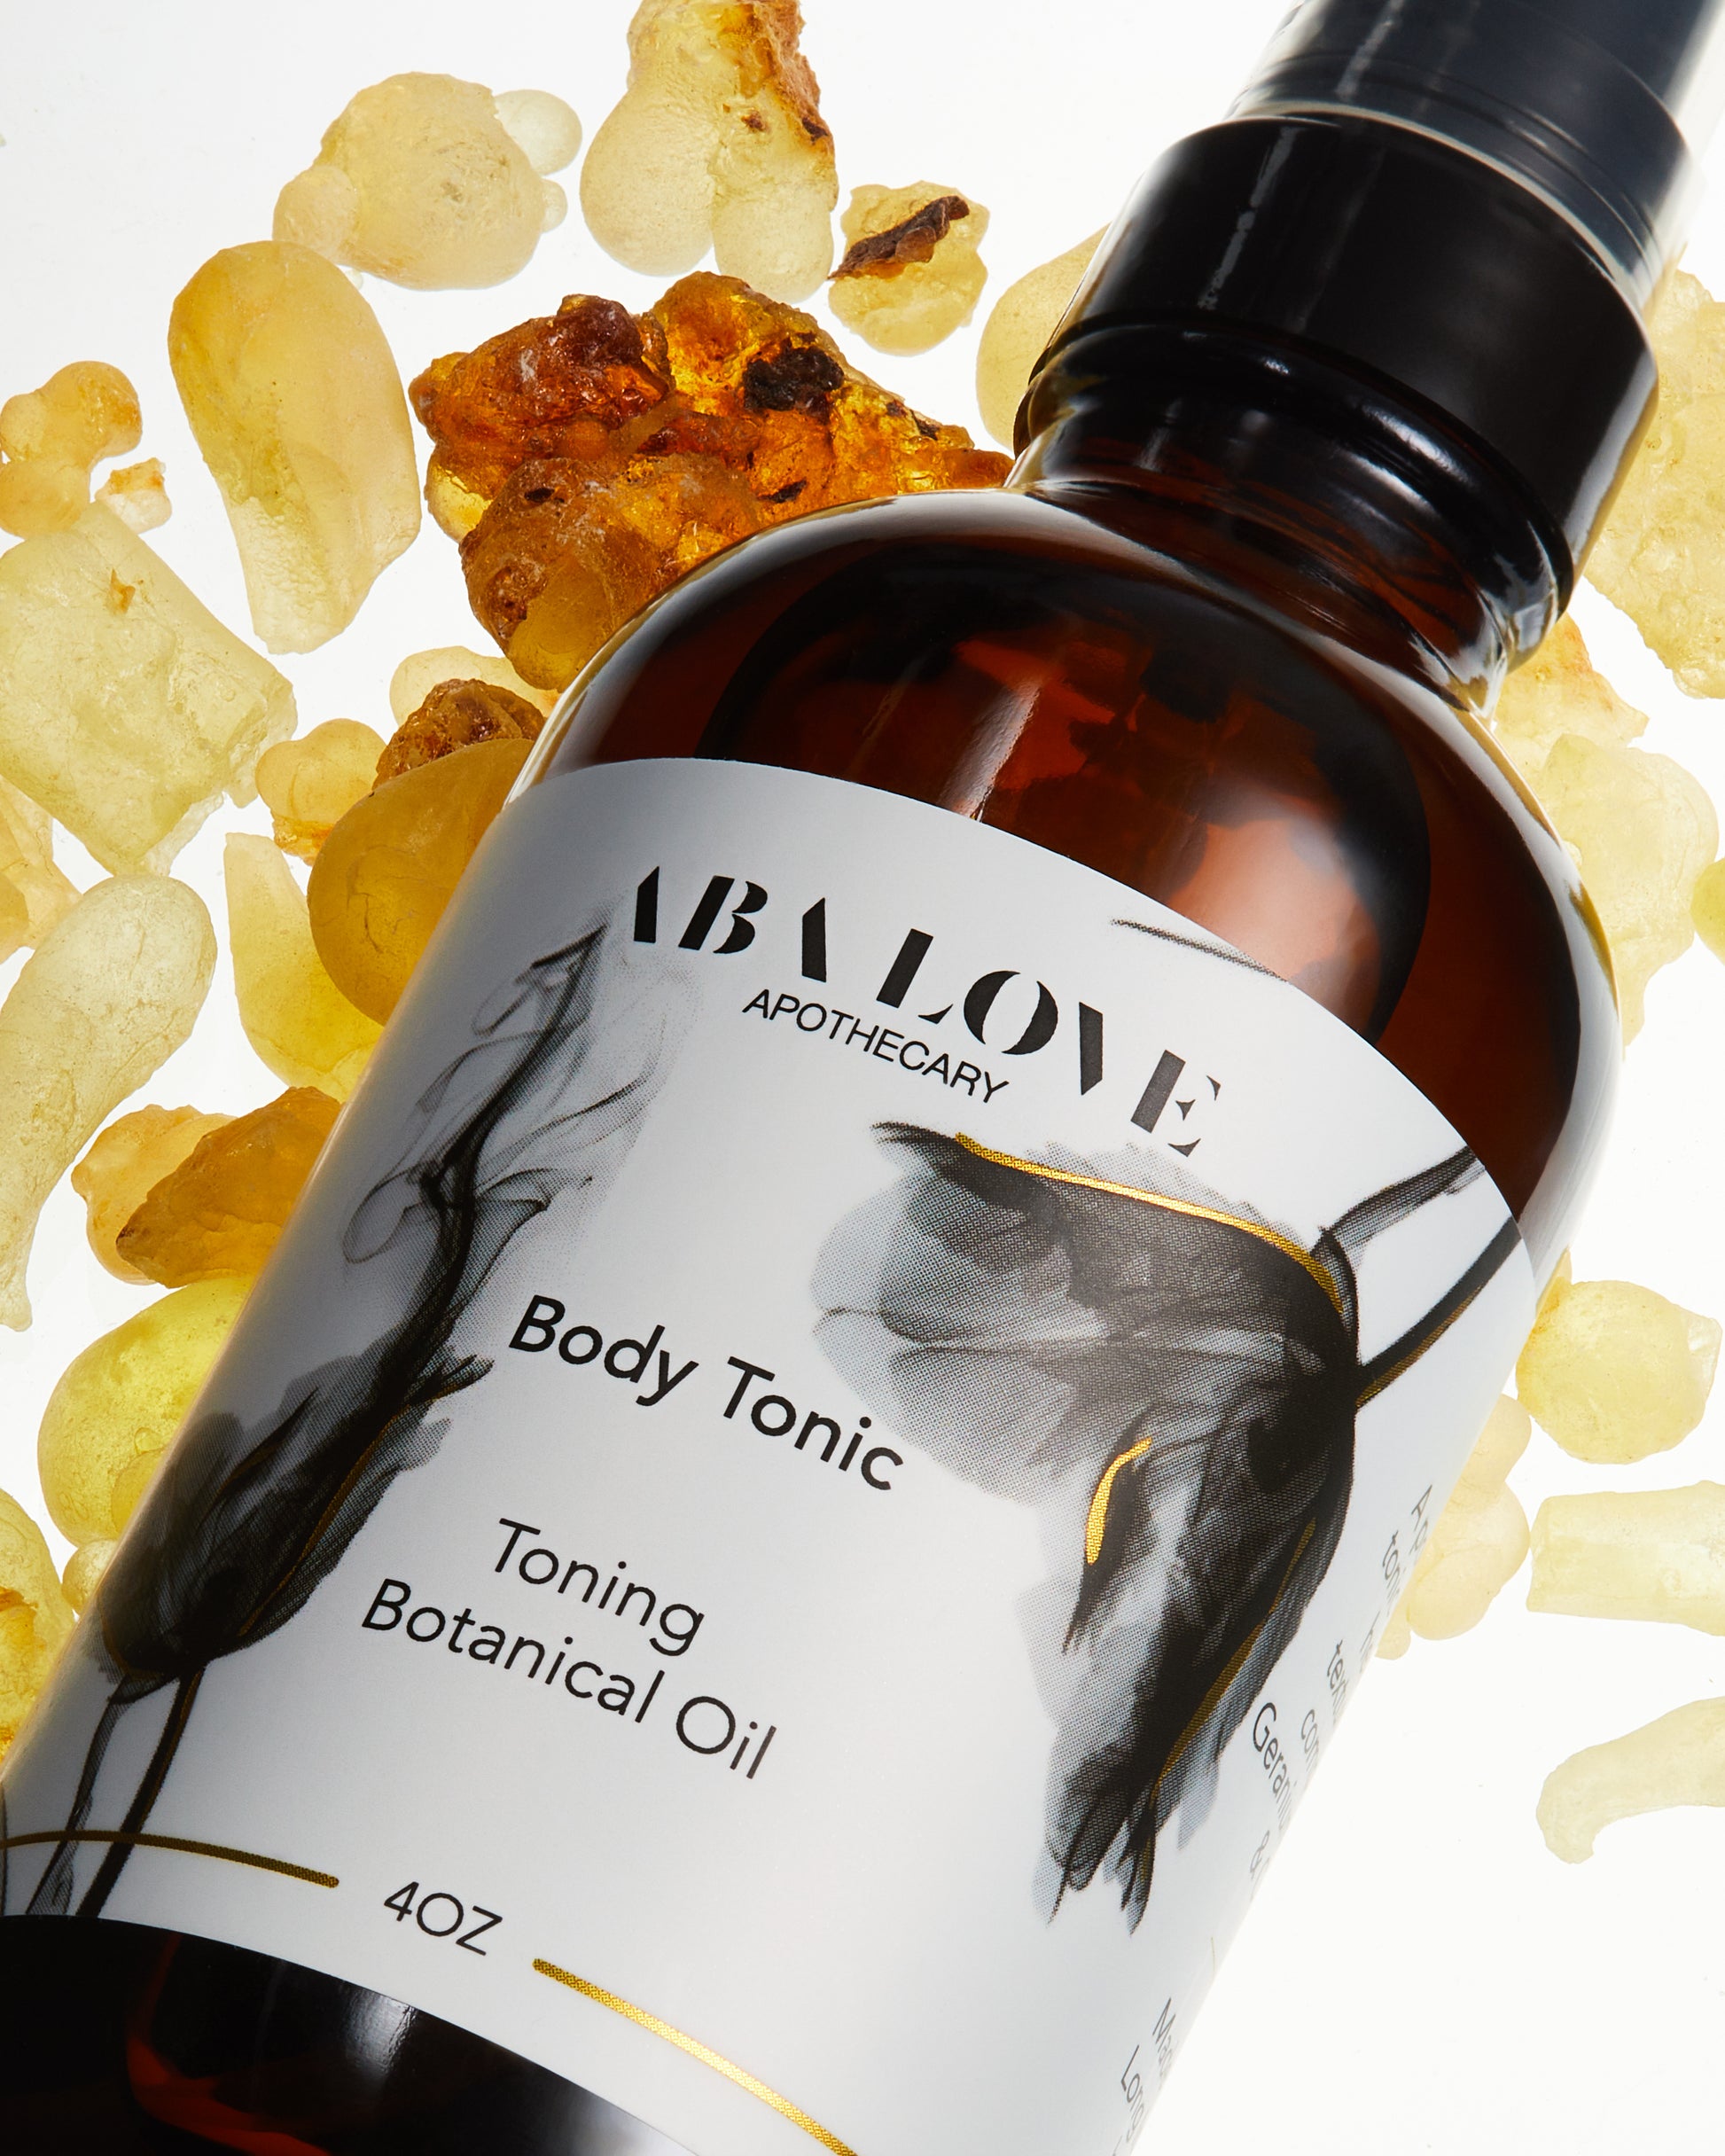 Amber colored bottle with black treatment pump.  "Aba Love Apothecary Body Tonic Toning Botanical Oil". The label is white with gold trim and grey flowers. The bottle lays flat on pieces of yellow colored frankincense resin